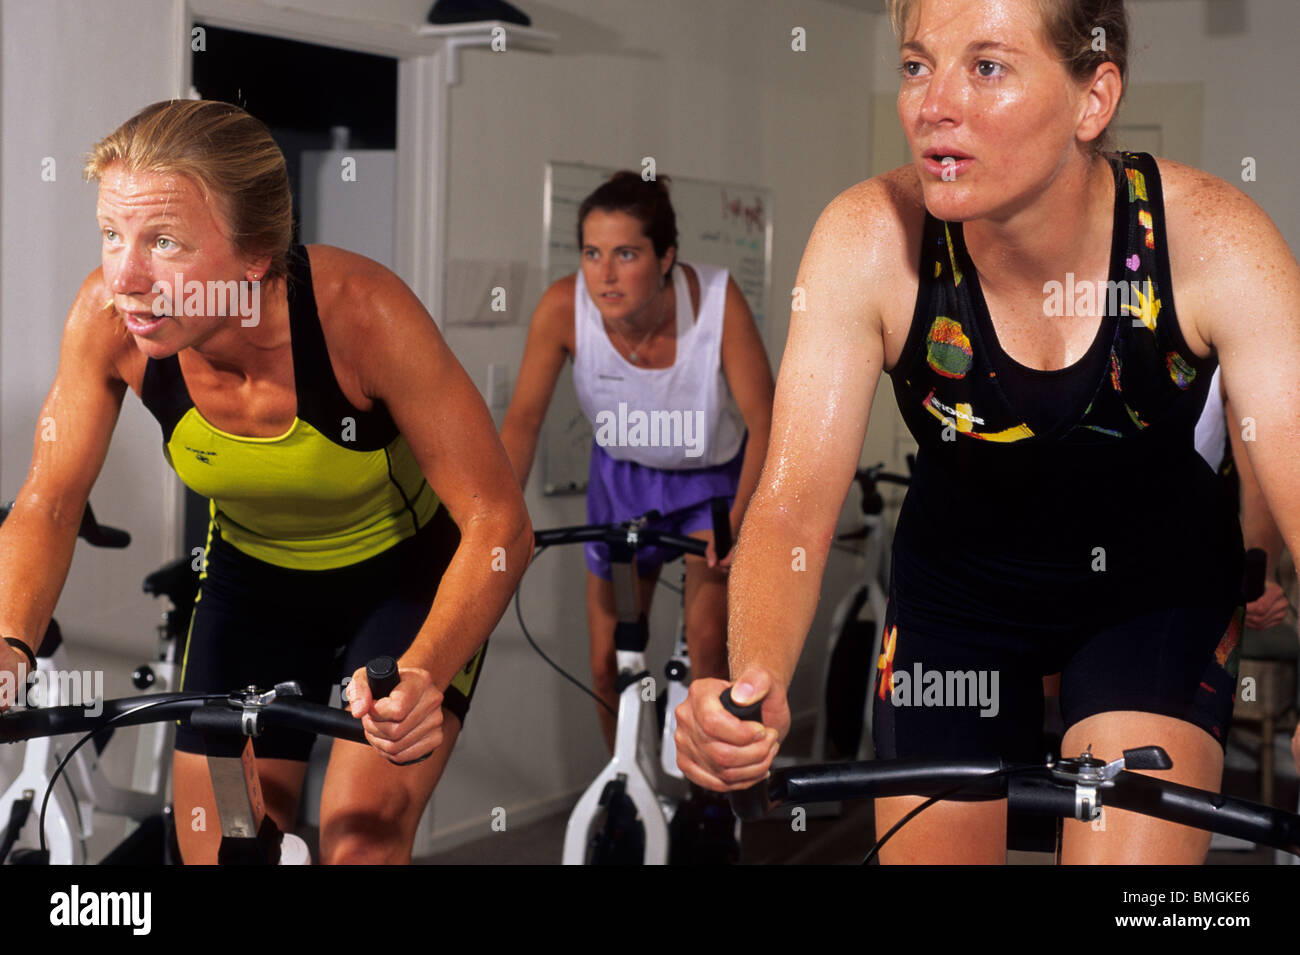 People in a spinning class at the gym. Stock Photo